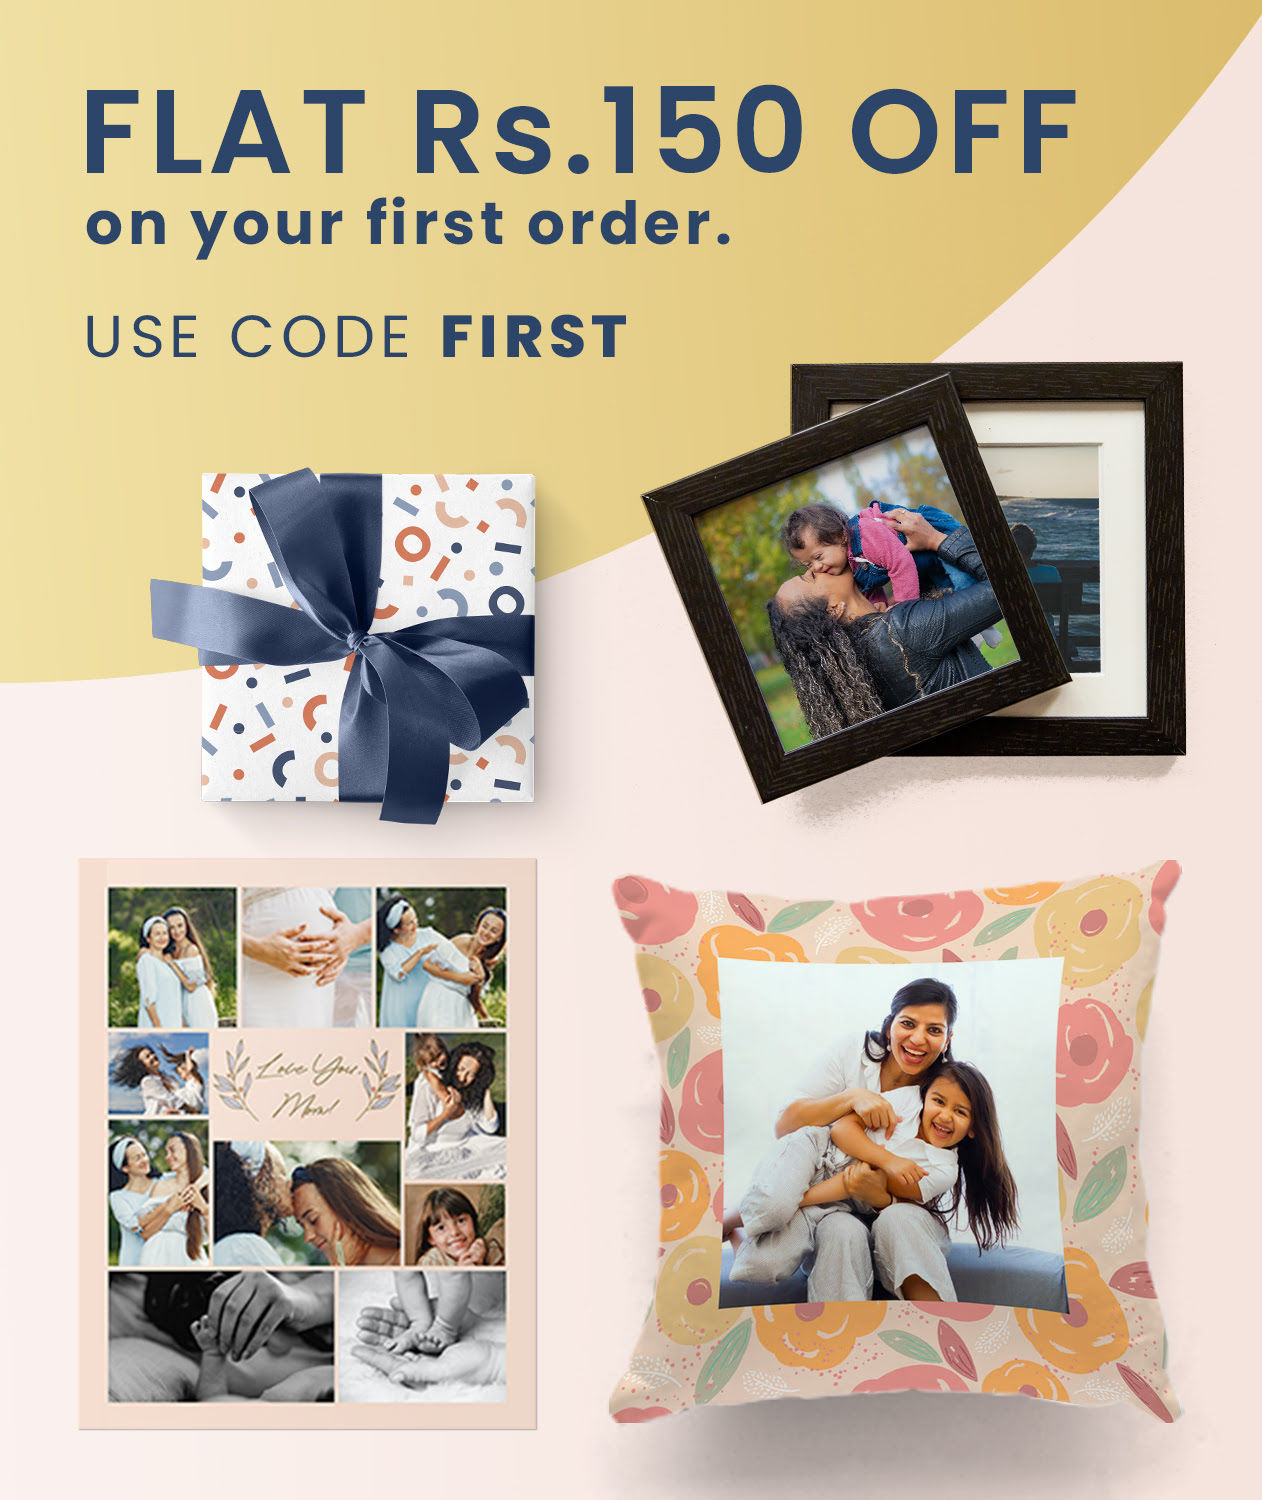 Zoomin new user offer coupon code - Flat Rs.150 Off on first order